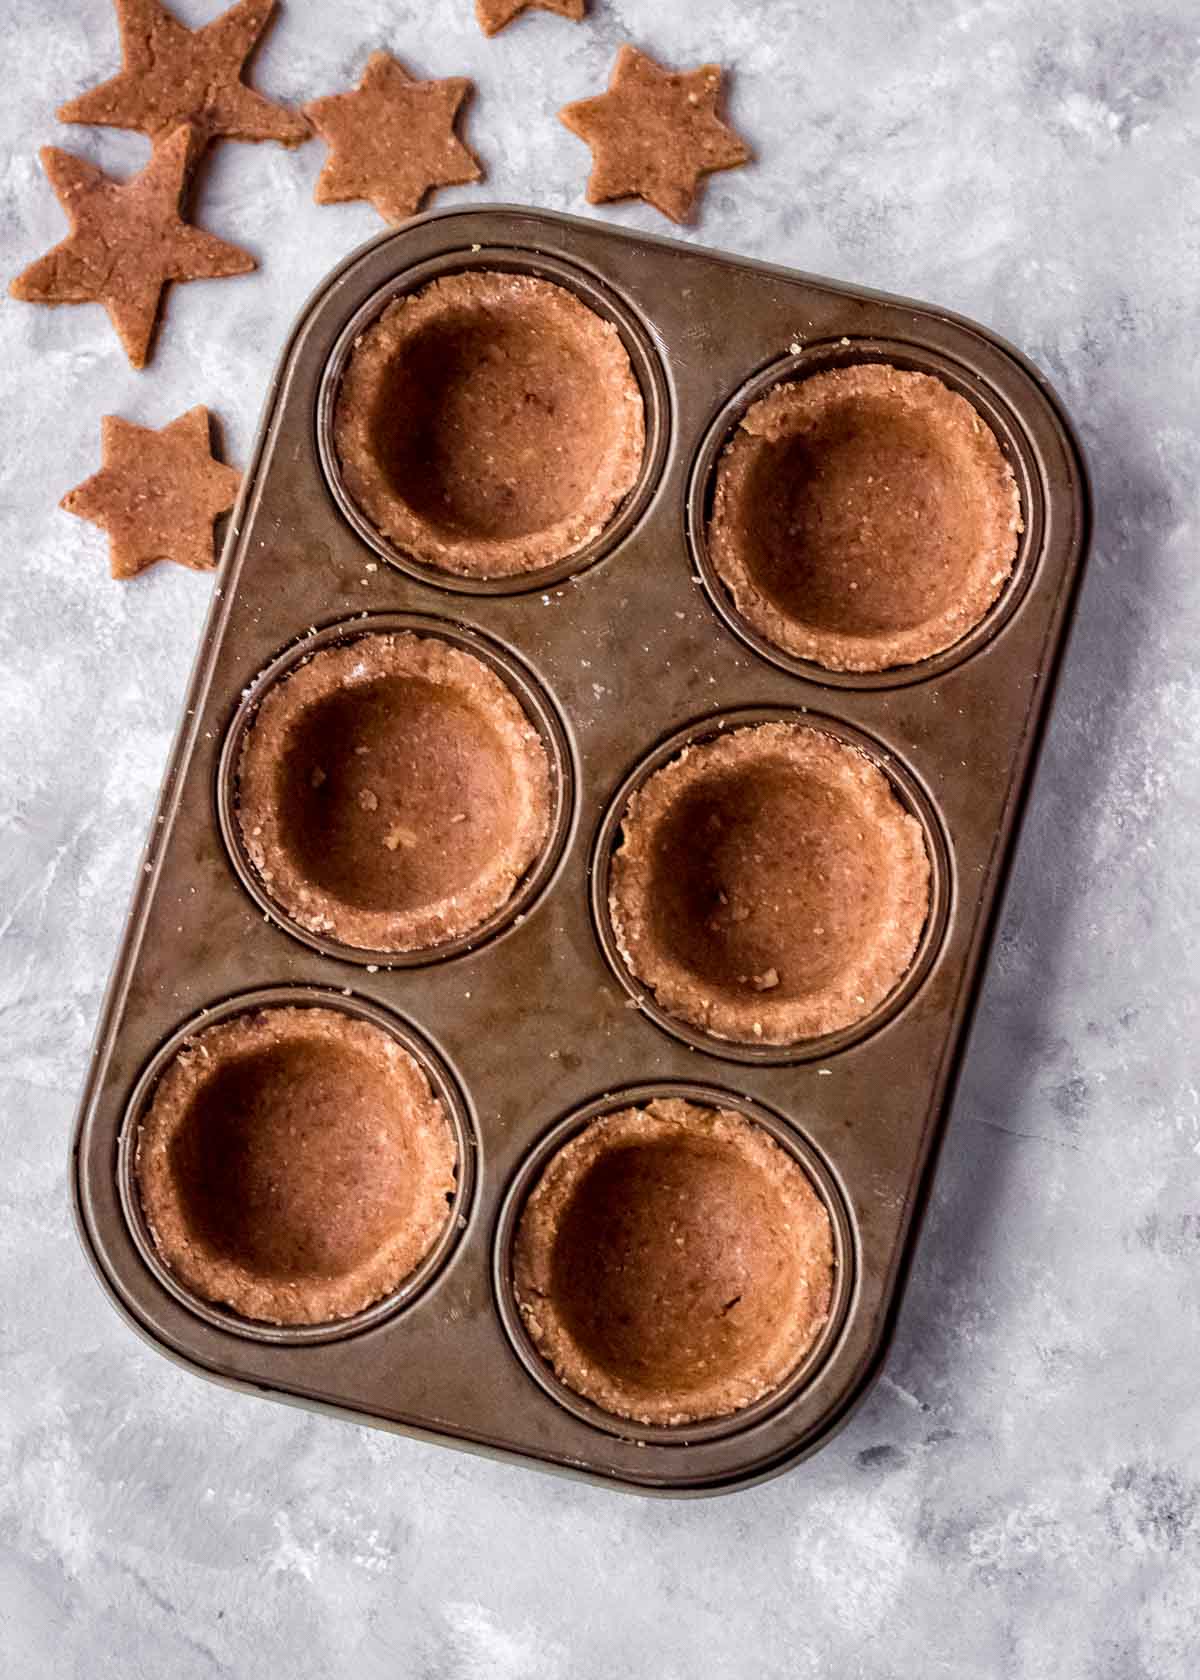 Empty vegan mince pie shells sit in muffin tins, with pastry stars nearby.